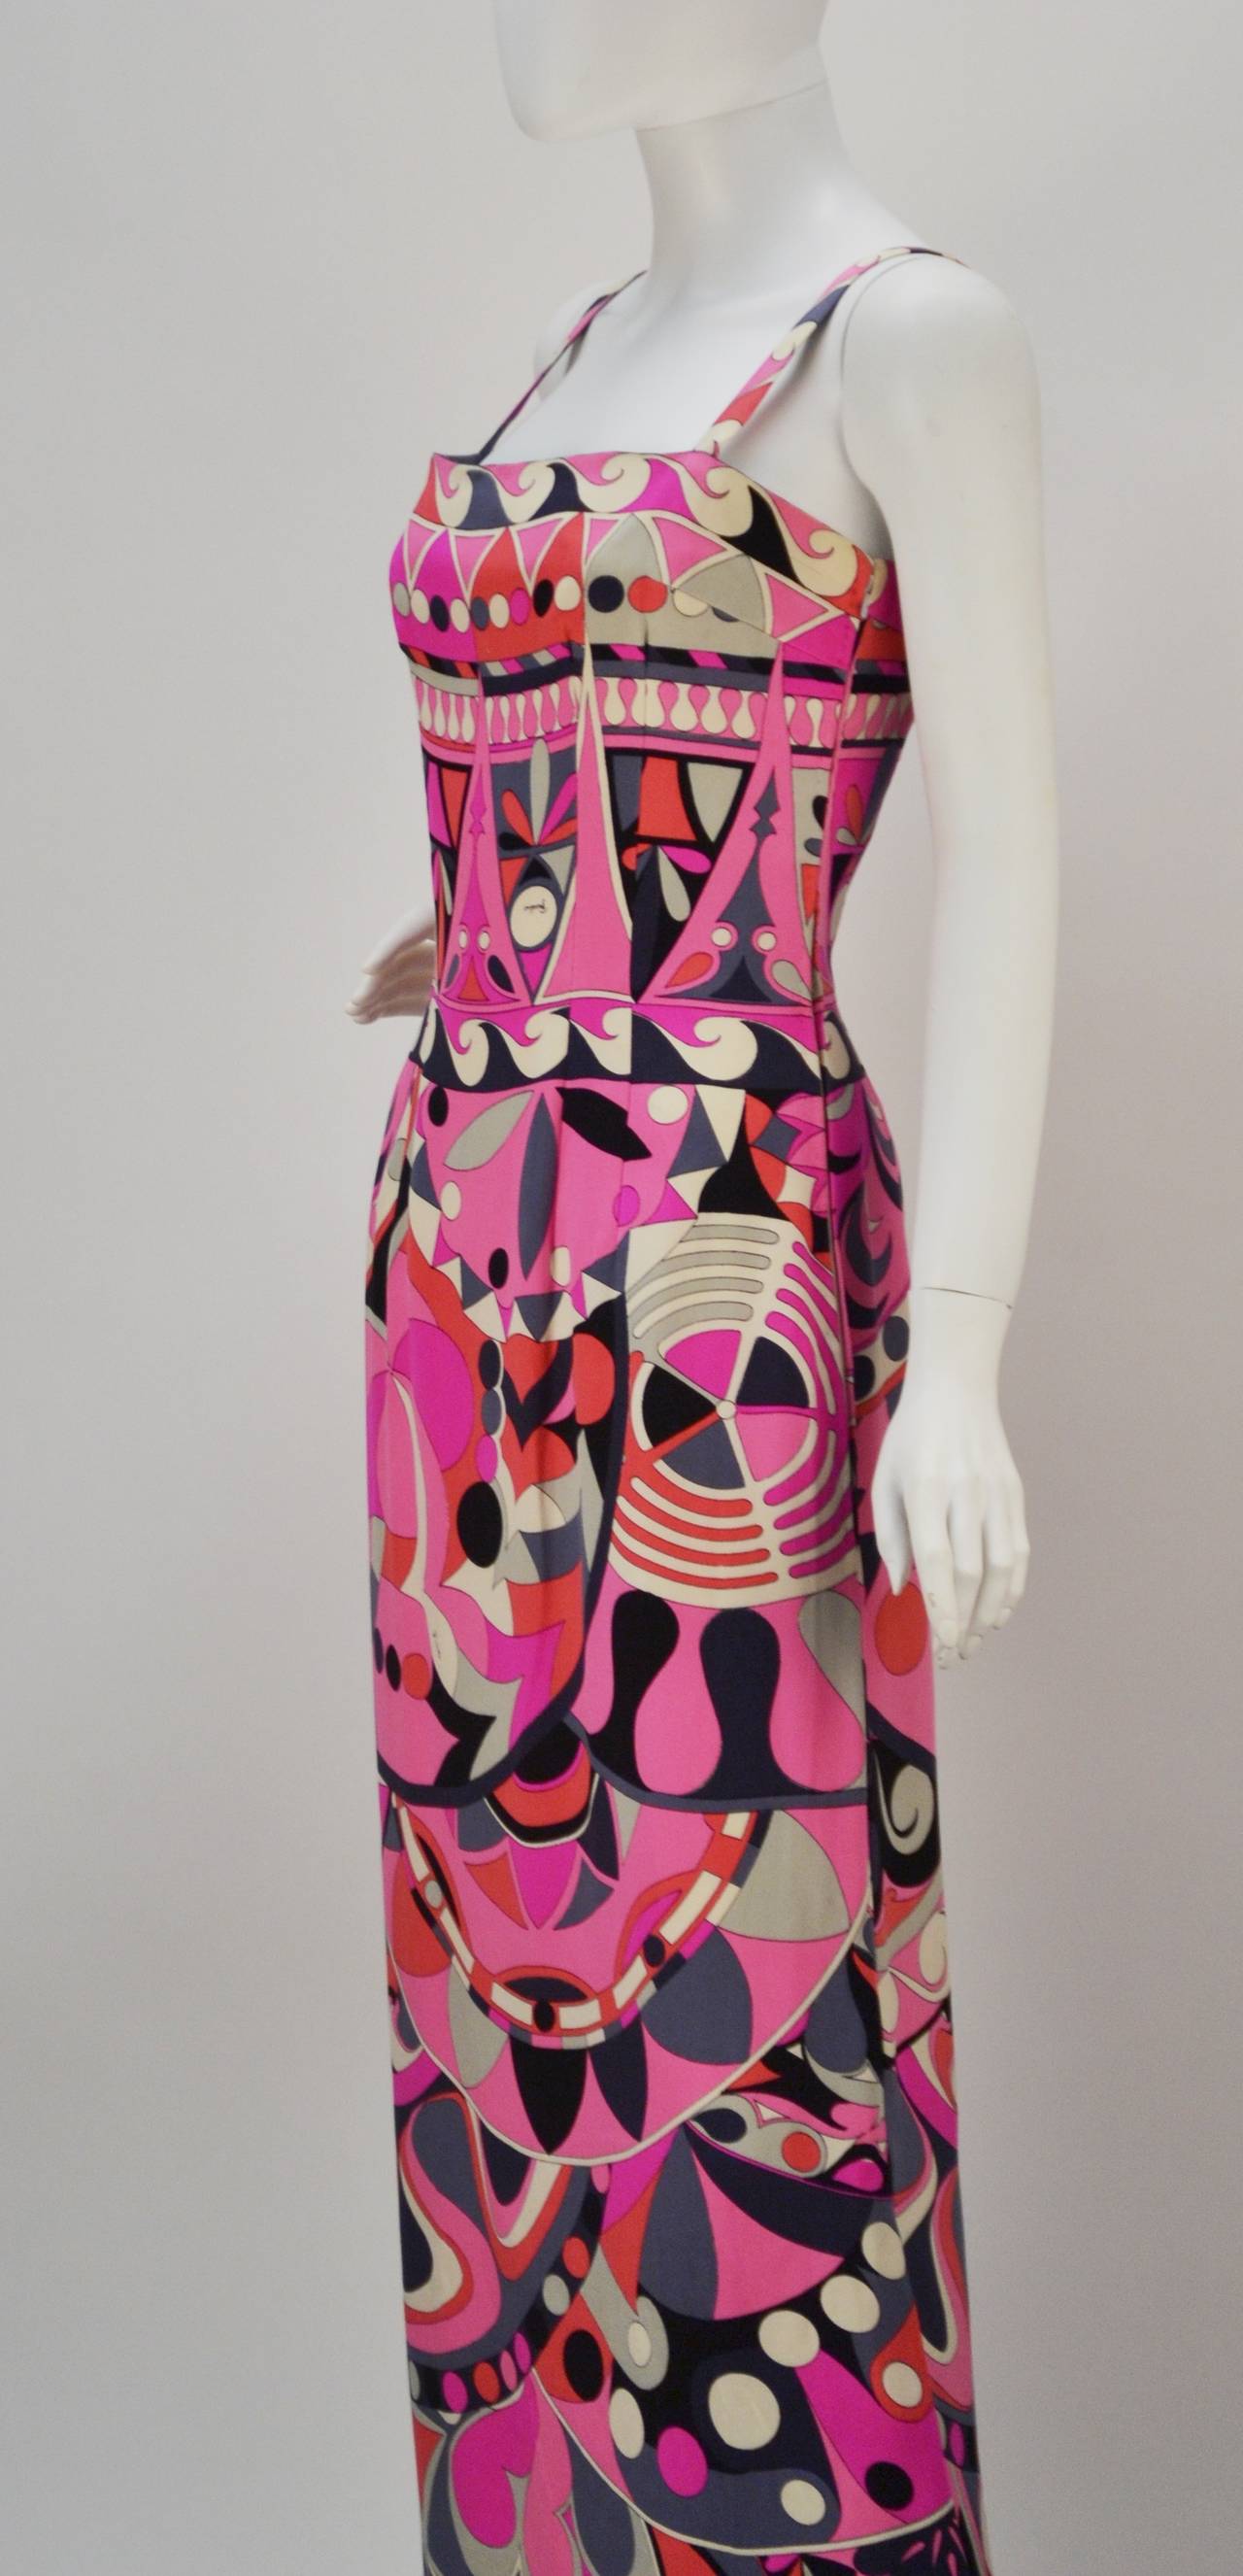 Stunning 1960's Emilio Pucci silk jersey multi-color maxi dress with narrow straps. This is a quintessential Pucci!  Emilio's signature can be seen throughout the vibrant print. The dress fastens with a side-zippered and hook-n-eye closure. The